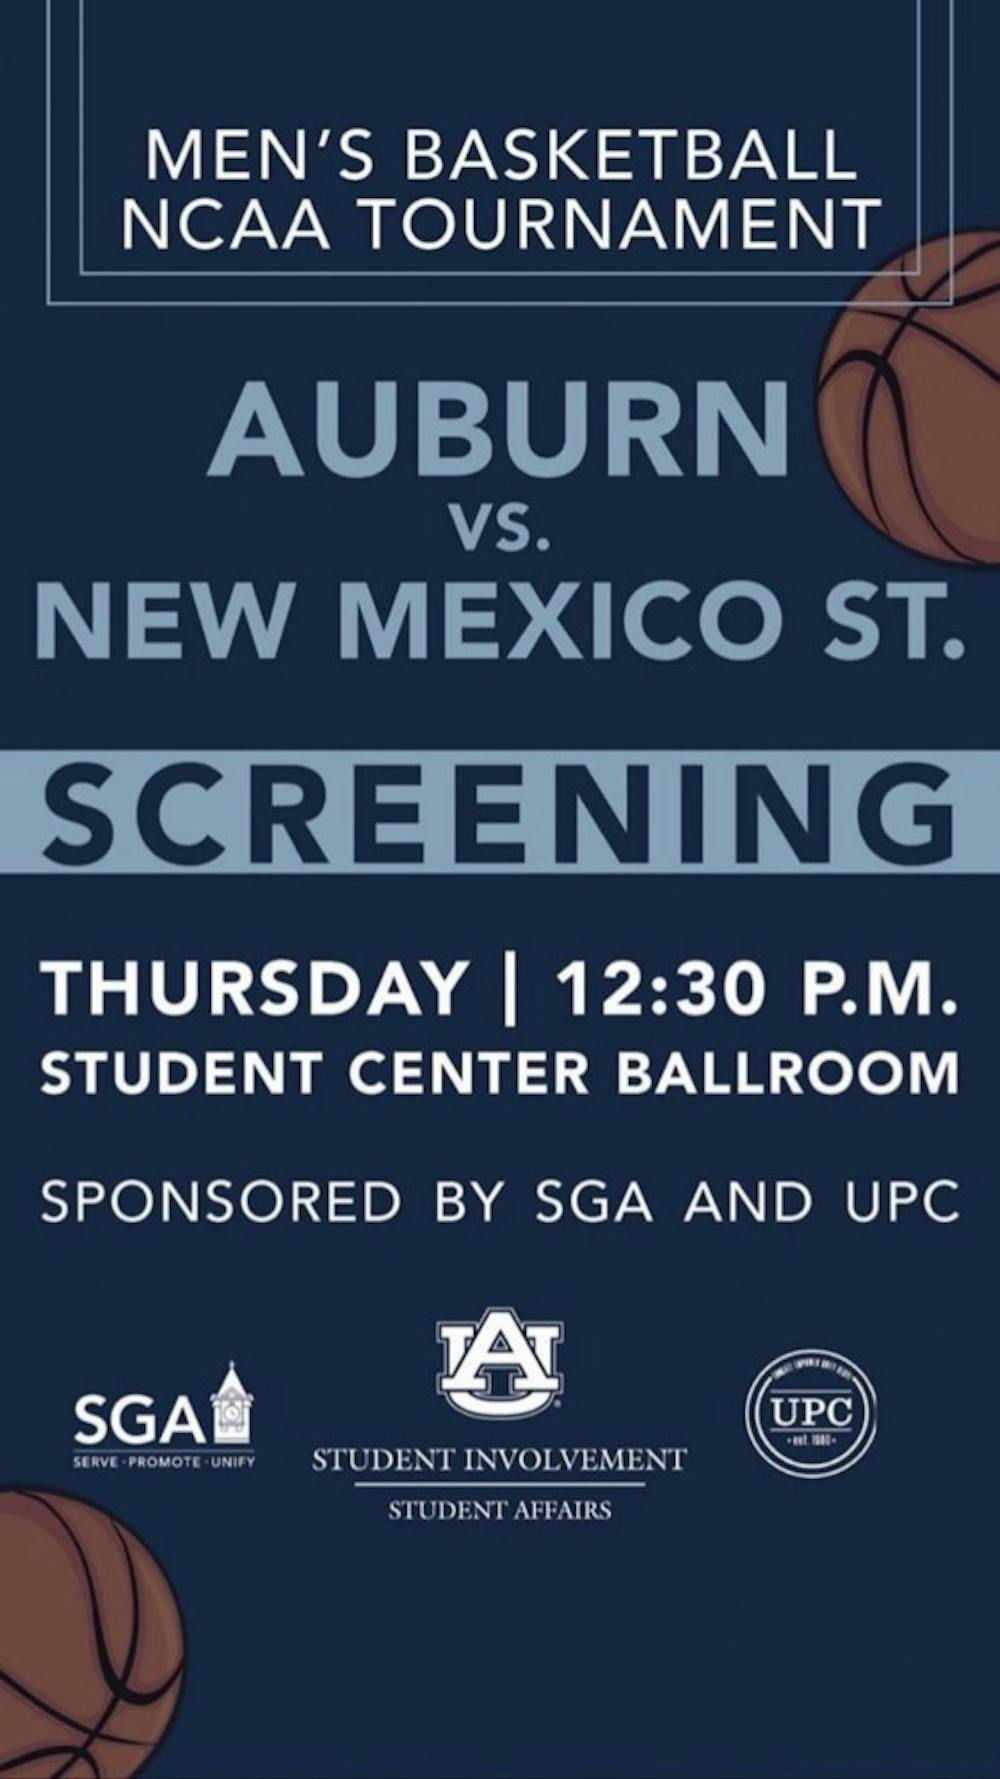 <p>SGA and UPC are pairing to host a screening for Auburn's men's basketball game on Thursday at 12:30 p.m. against New Mexico State.&nbsp;</p>